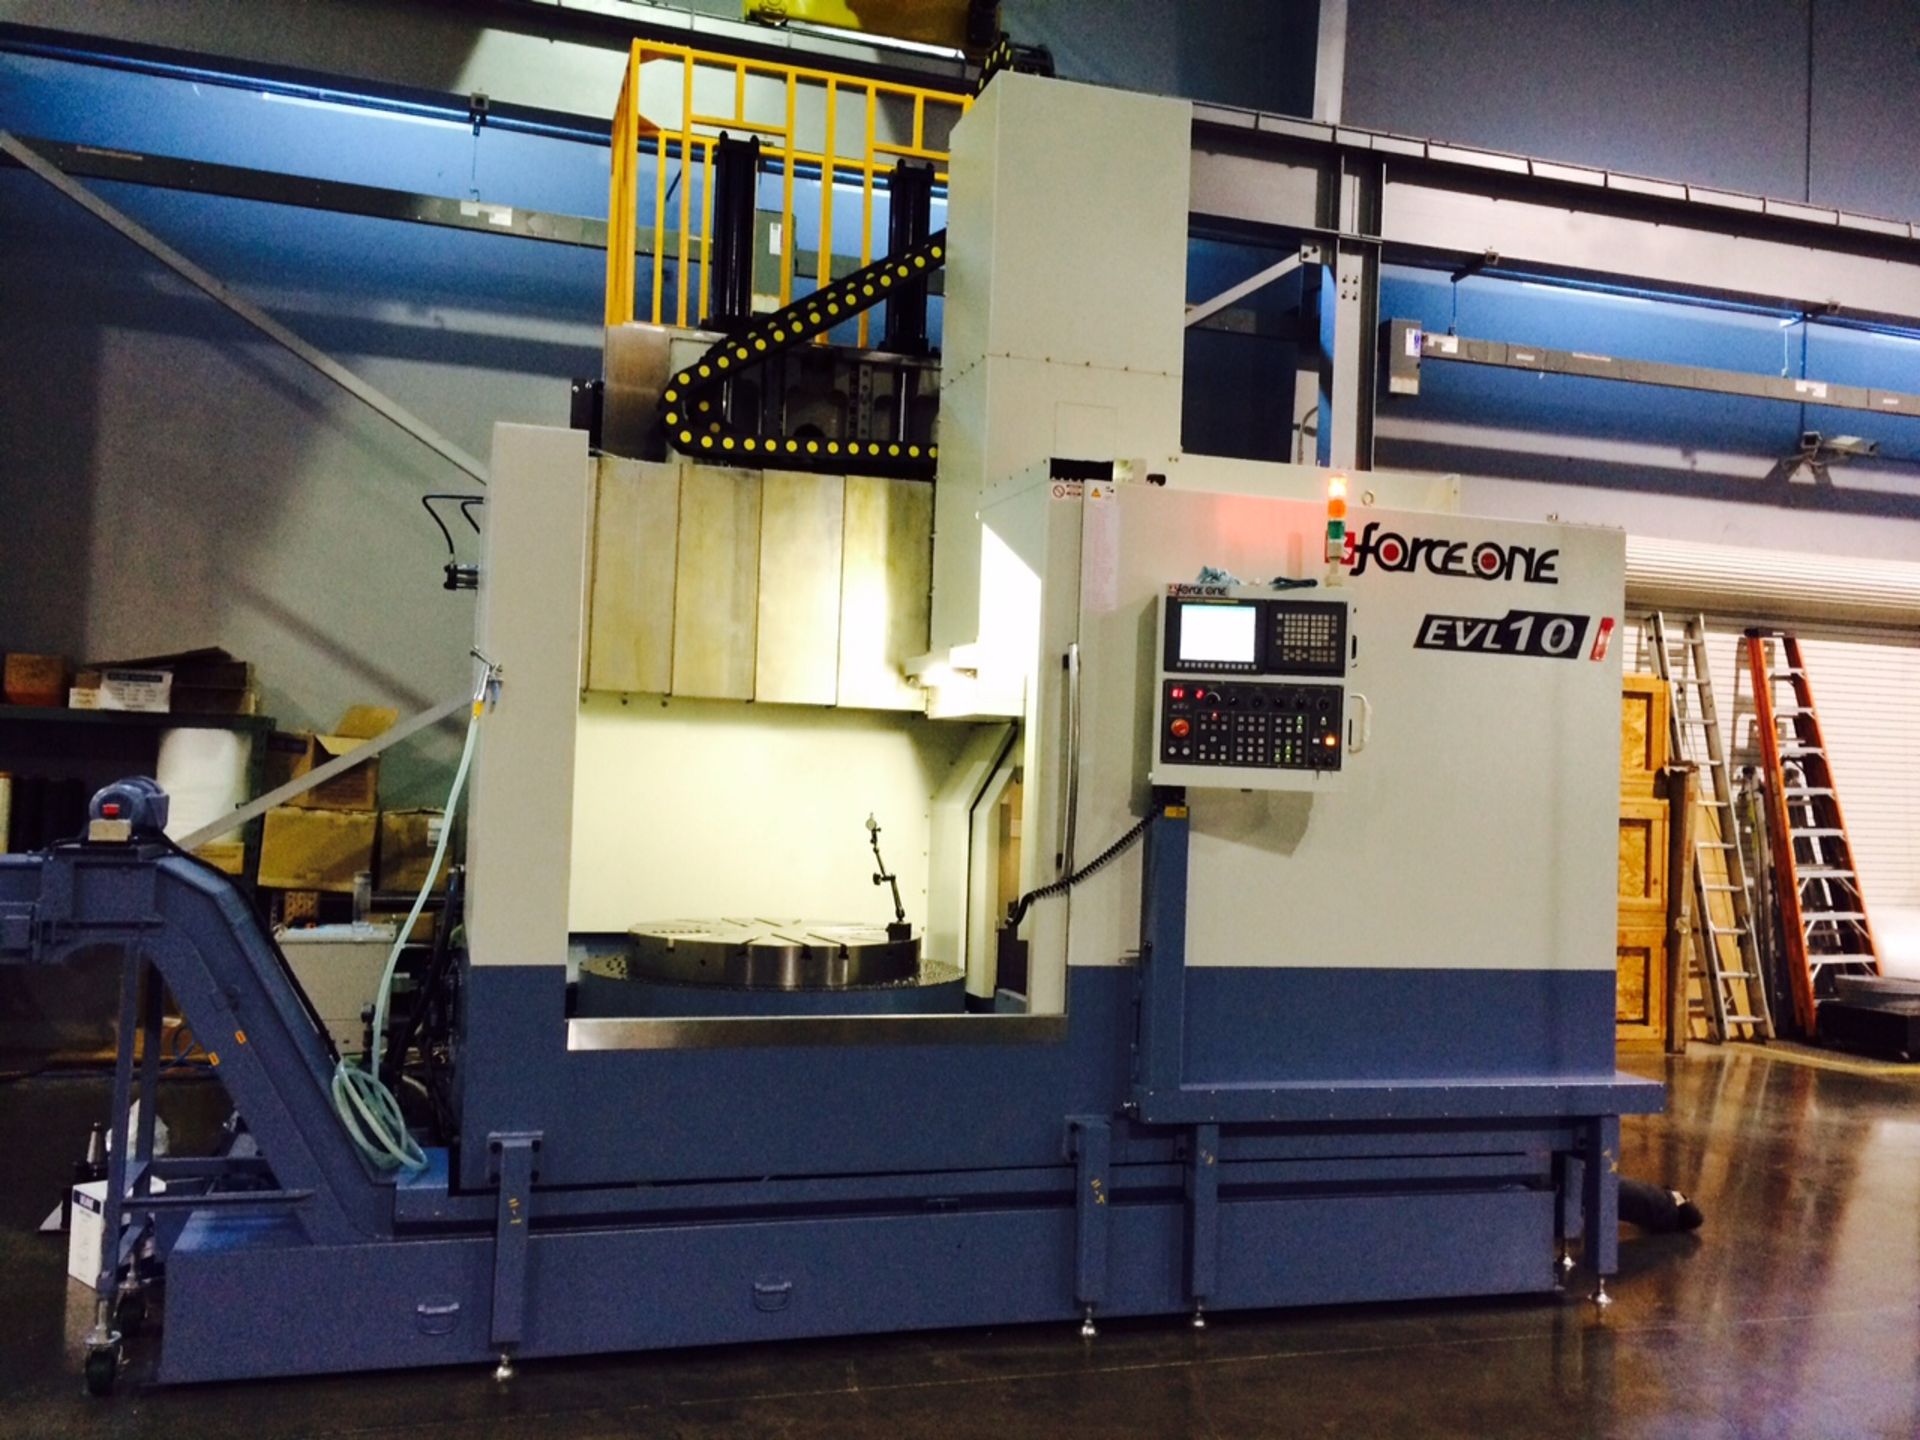 UNUSED CNC VERTICAL TURRET LATHE, FORCE ONE MDL. EVL10, Fanuc Oi-TD Control, 40" table, 55" max.